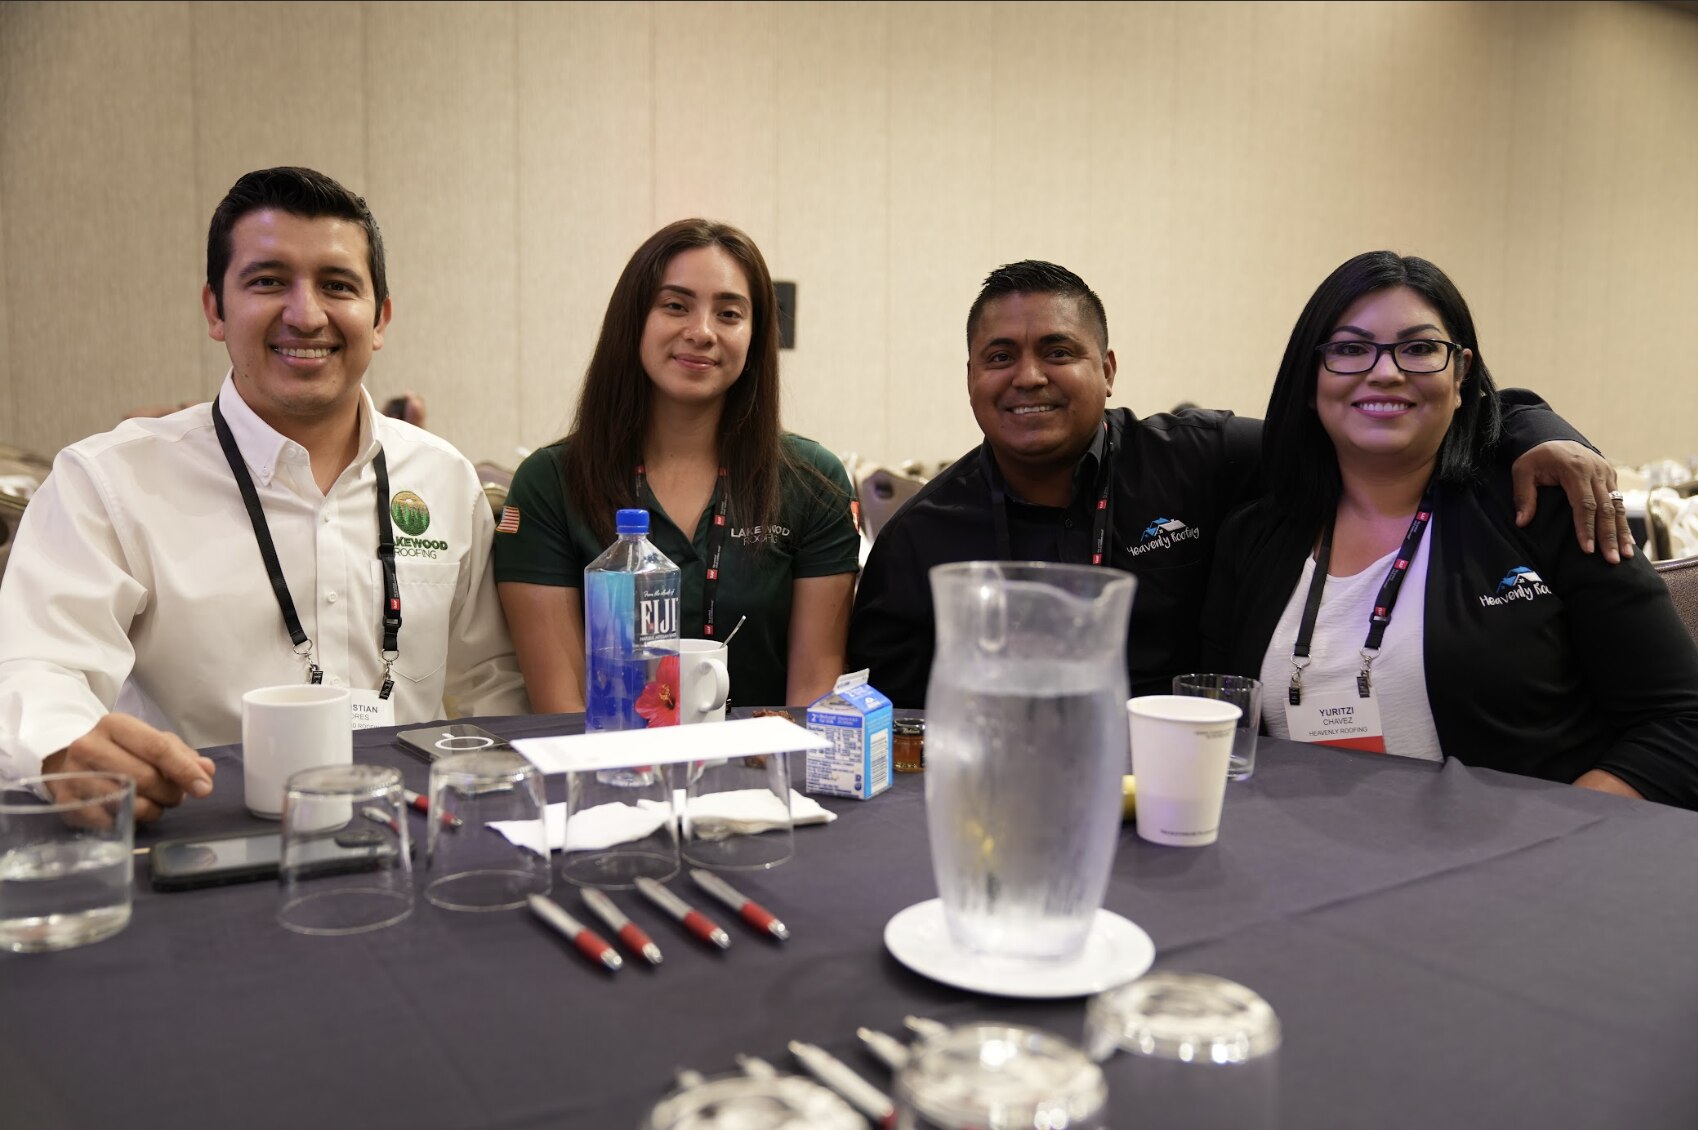 A group of 4 LIR Expo attendees smile at an event table together.